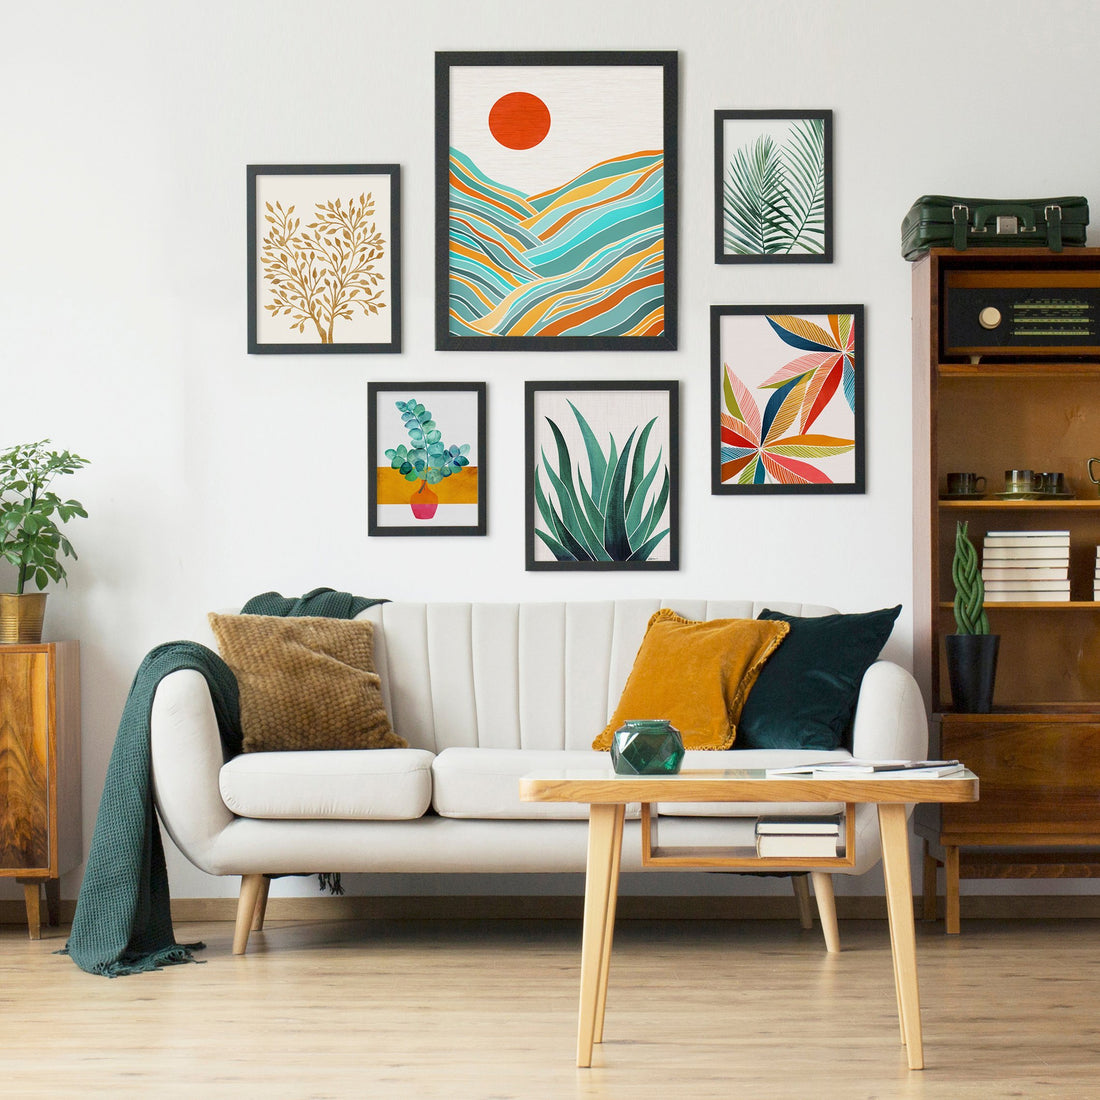 Add a Stylish Gallery Wall to Your Home in Record Time